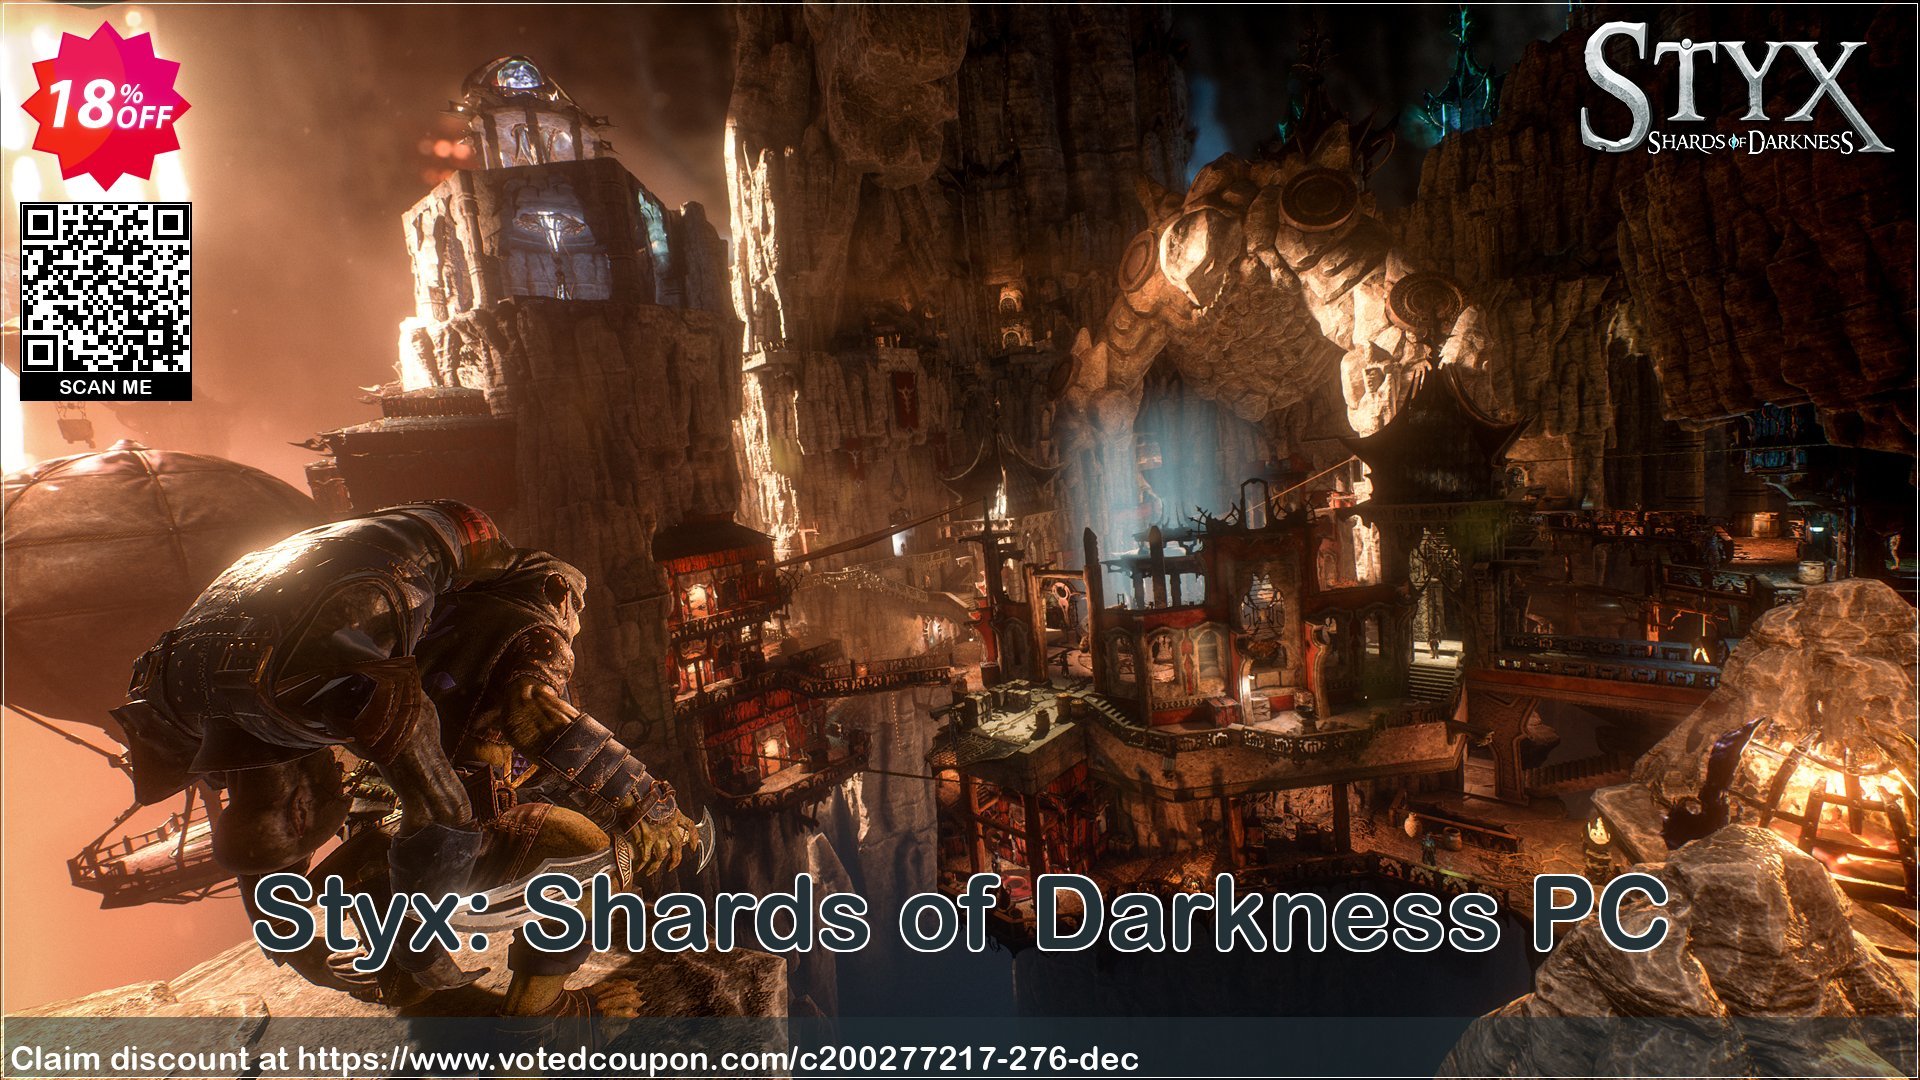 Styx: Shards of Darkness PC Coupon Code Apr 2024, 18% OFF - VotedCoupon